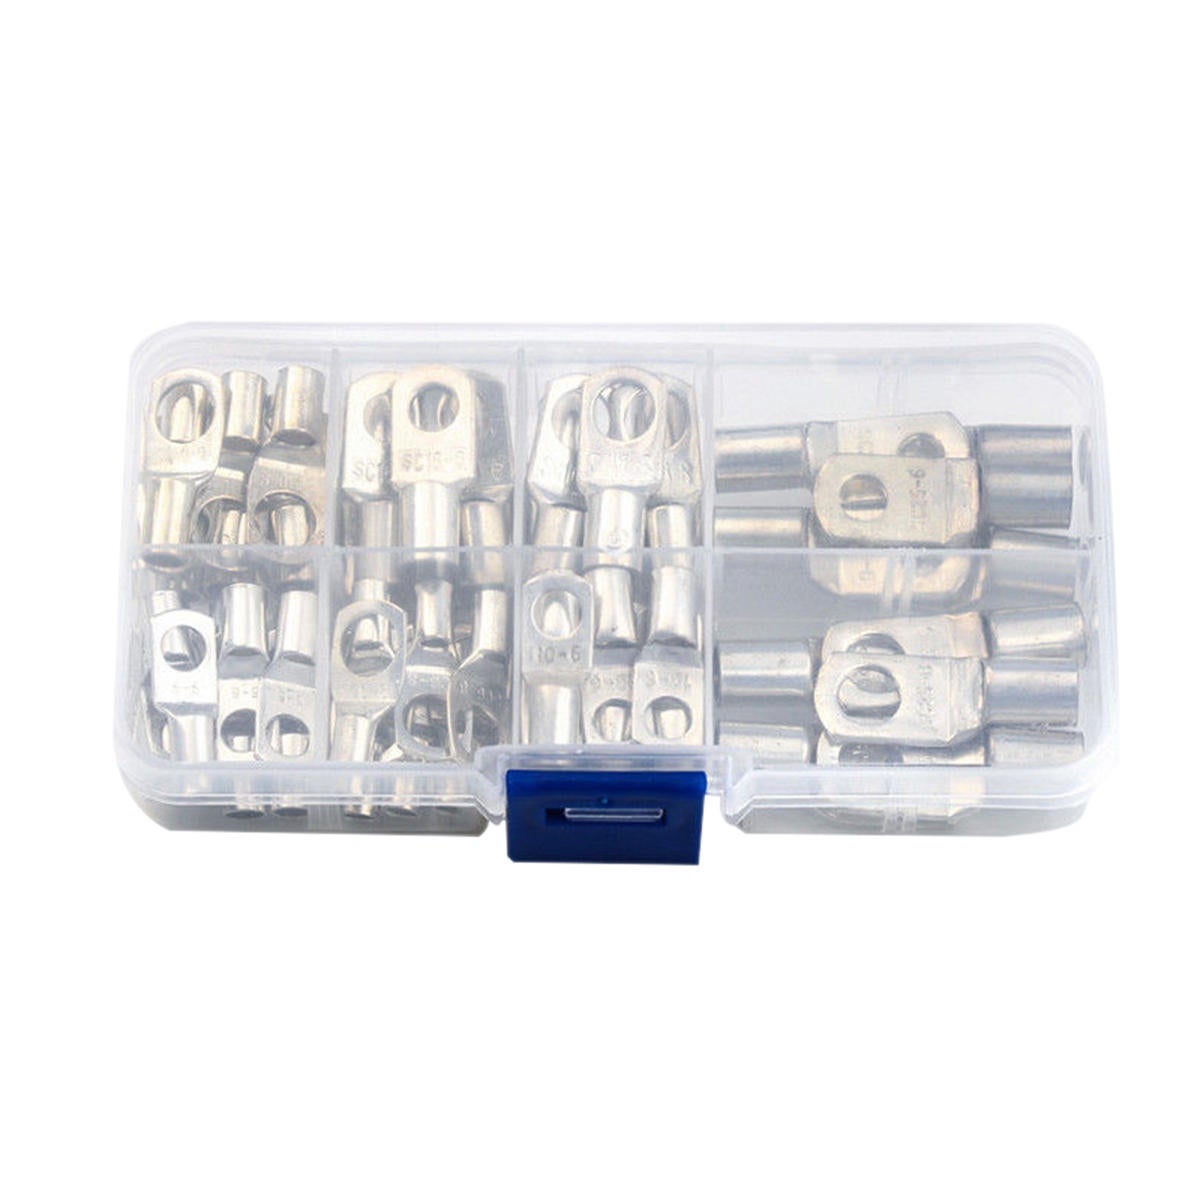 60Pcs Sc Series Terminals Cable Terminals Copper Lug Ring Seal Wire Connectors Assorted Kit